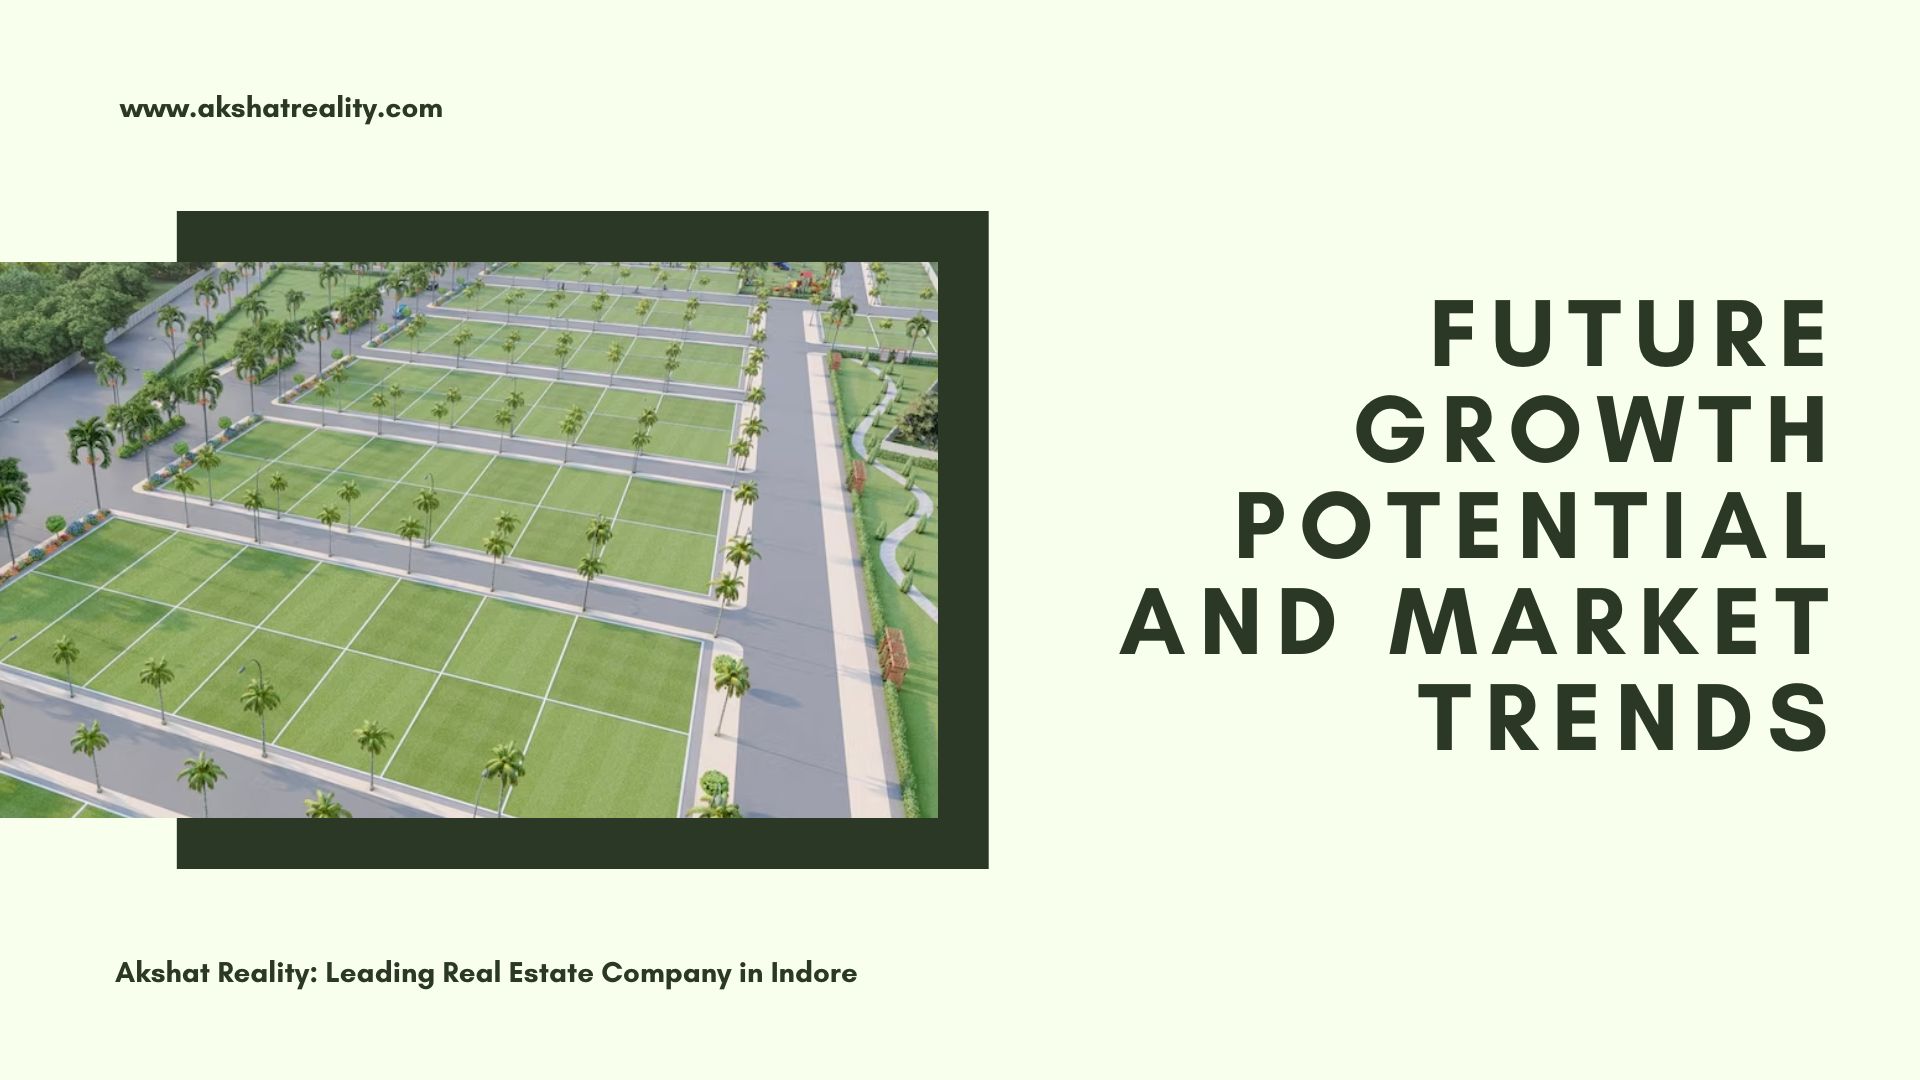 light cream color background with text "Future Growth Potential and Market Trends" with company name in bottom left "Akshat Reality: Leading Real Estate Company in Indore"